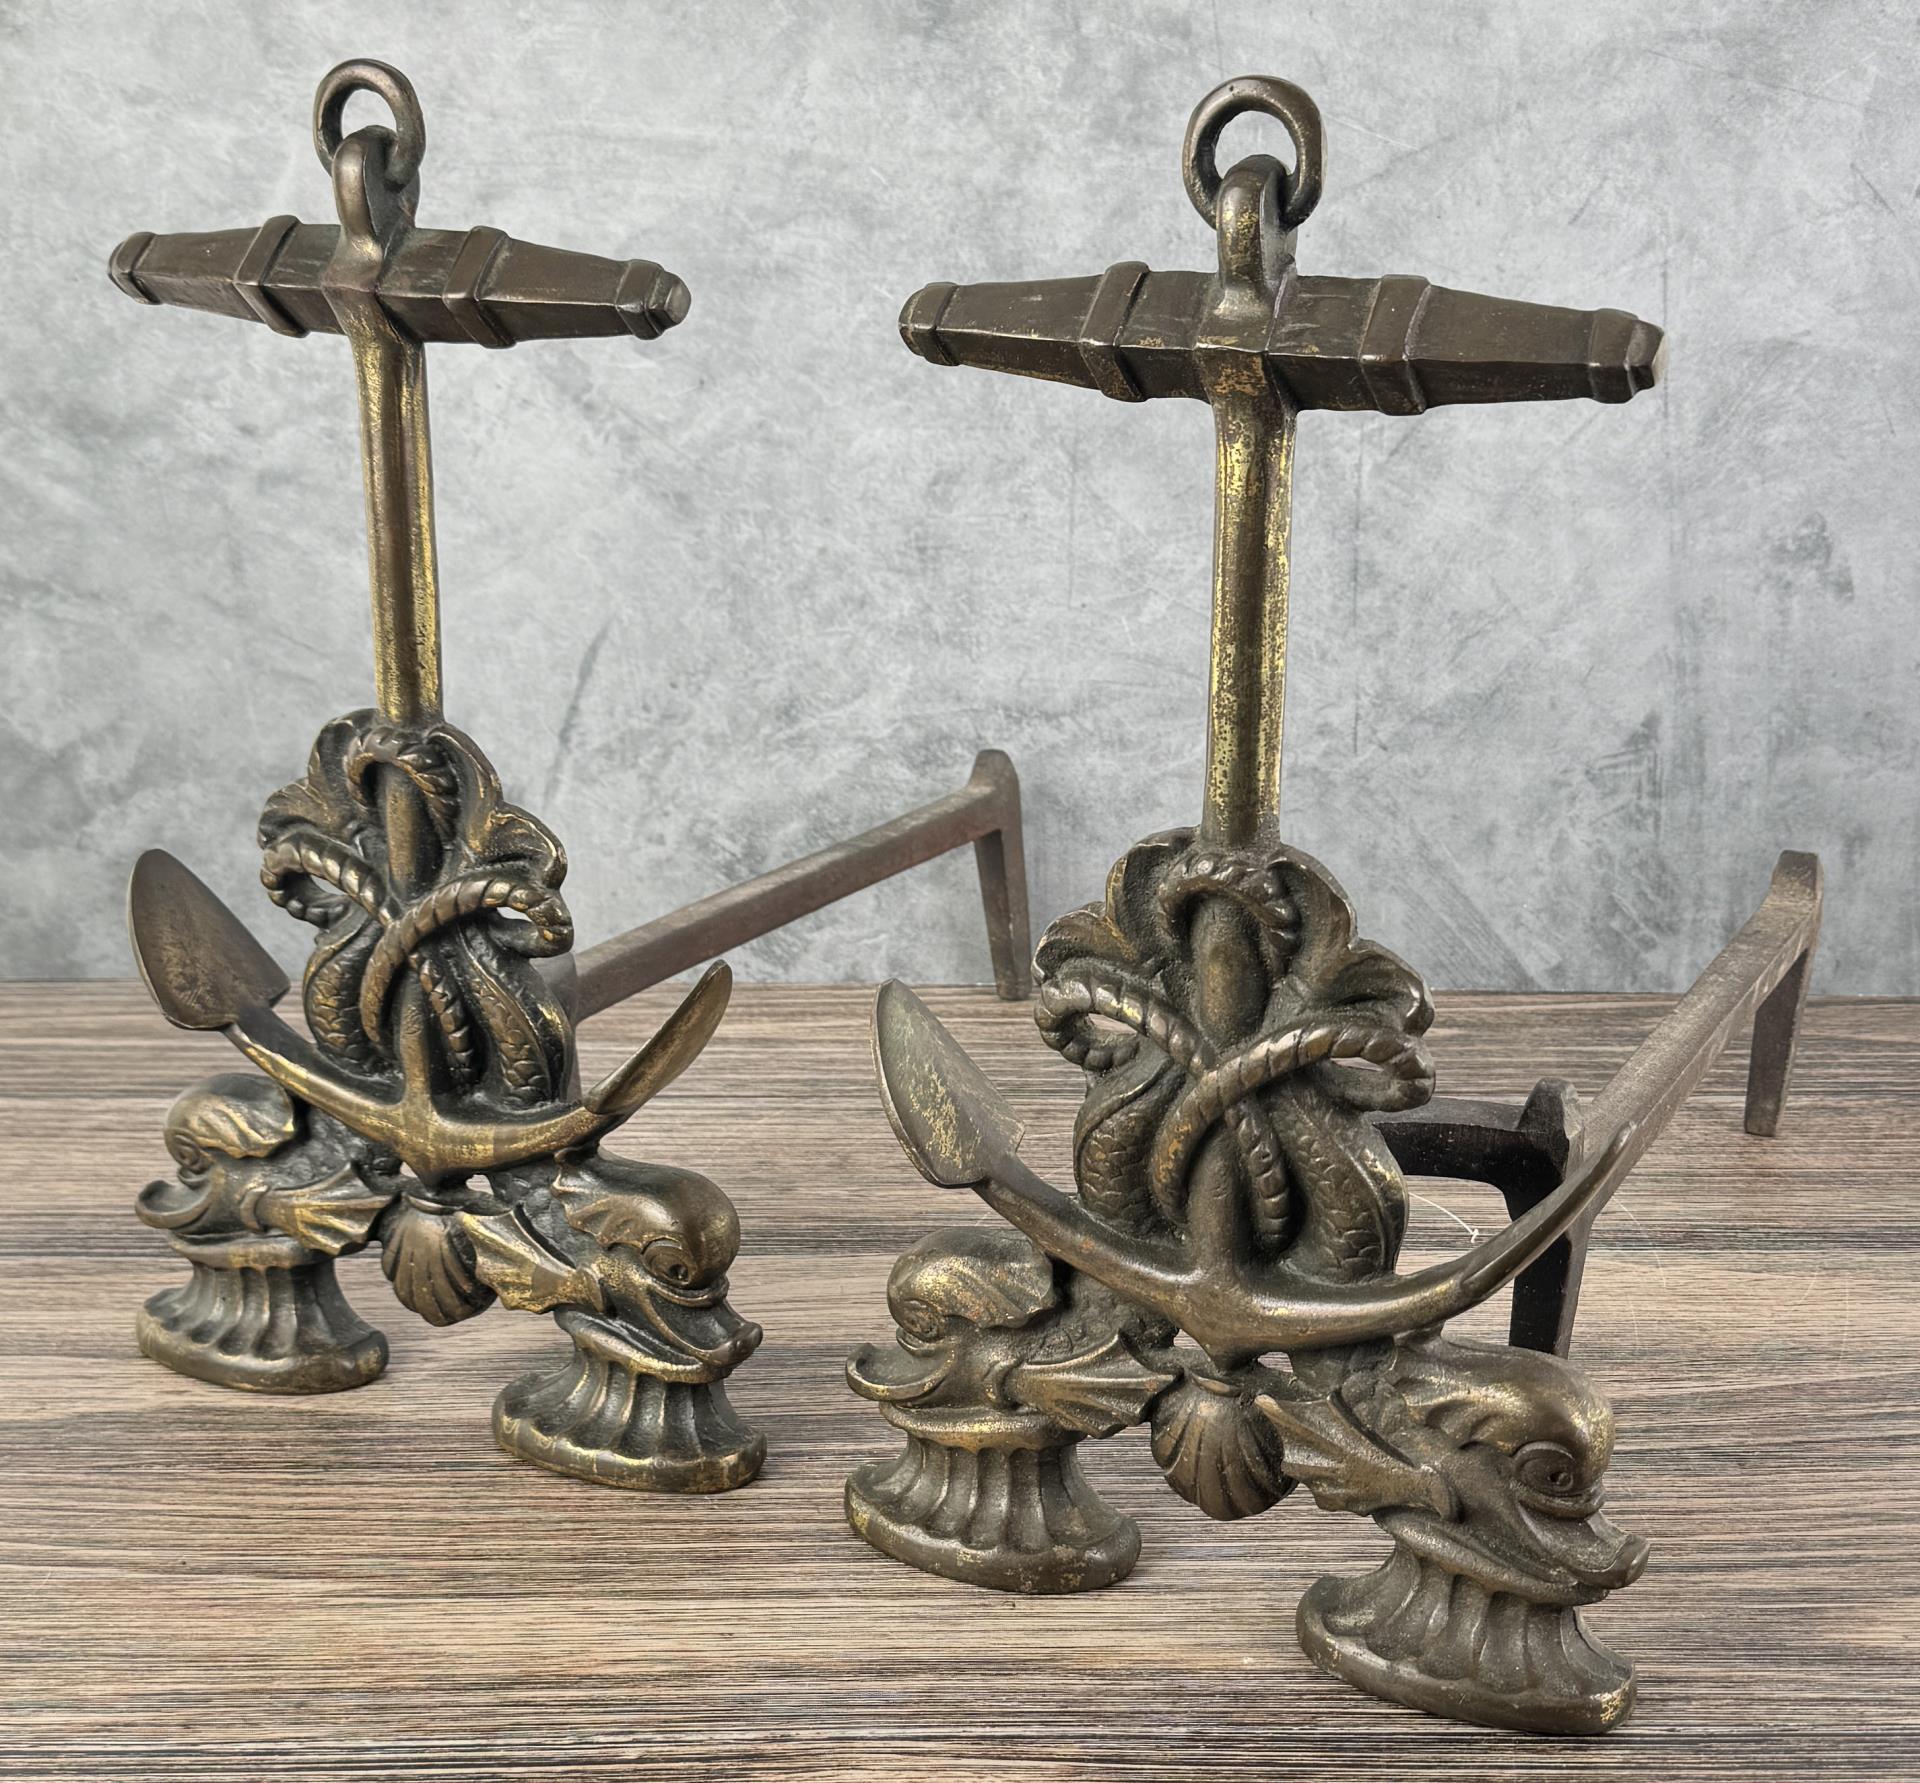 Antique Howes Double Dolphin Andirons